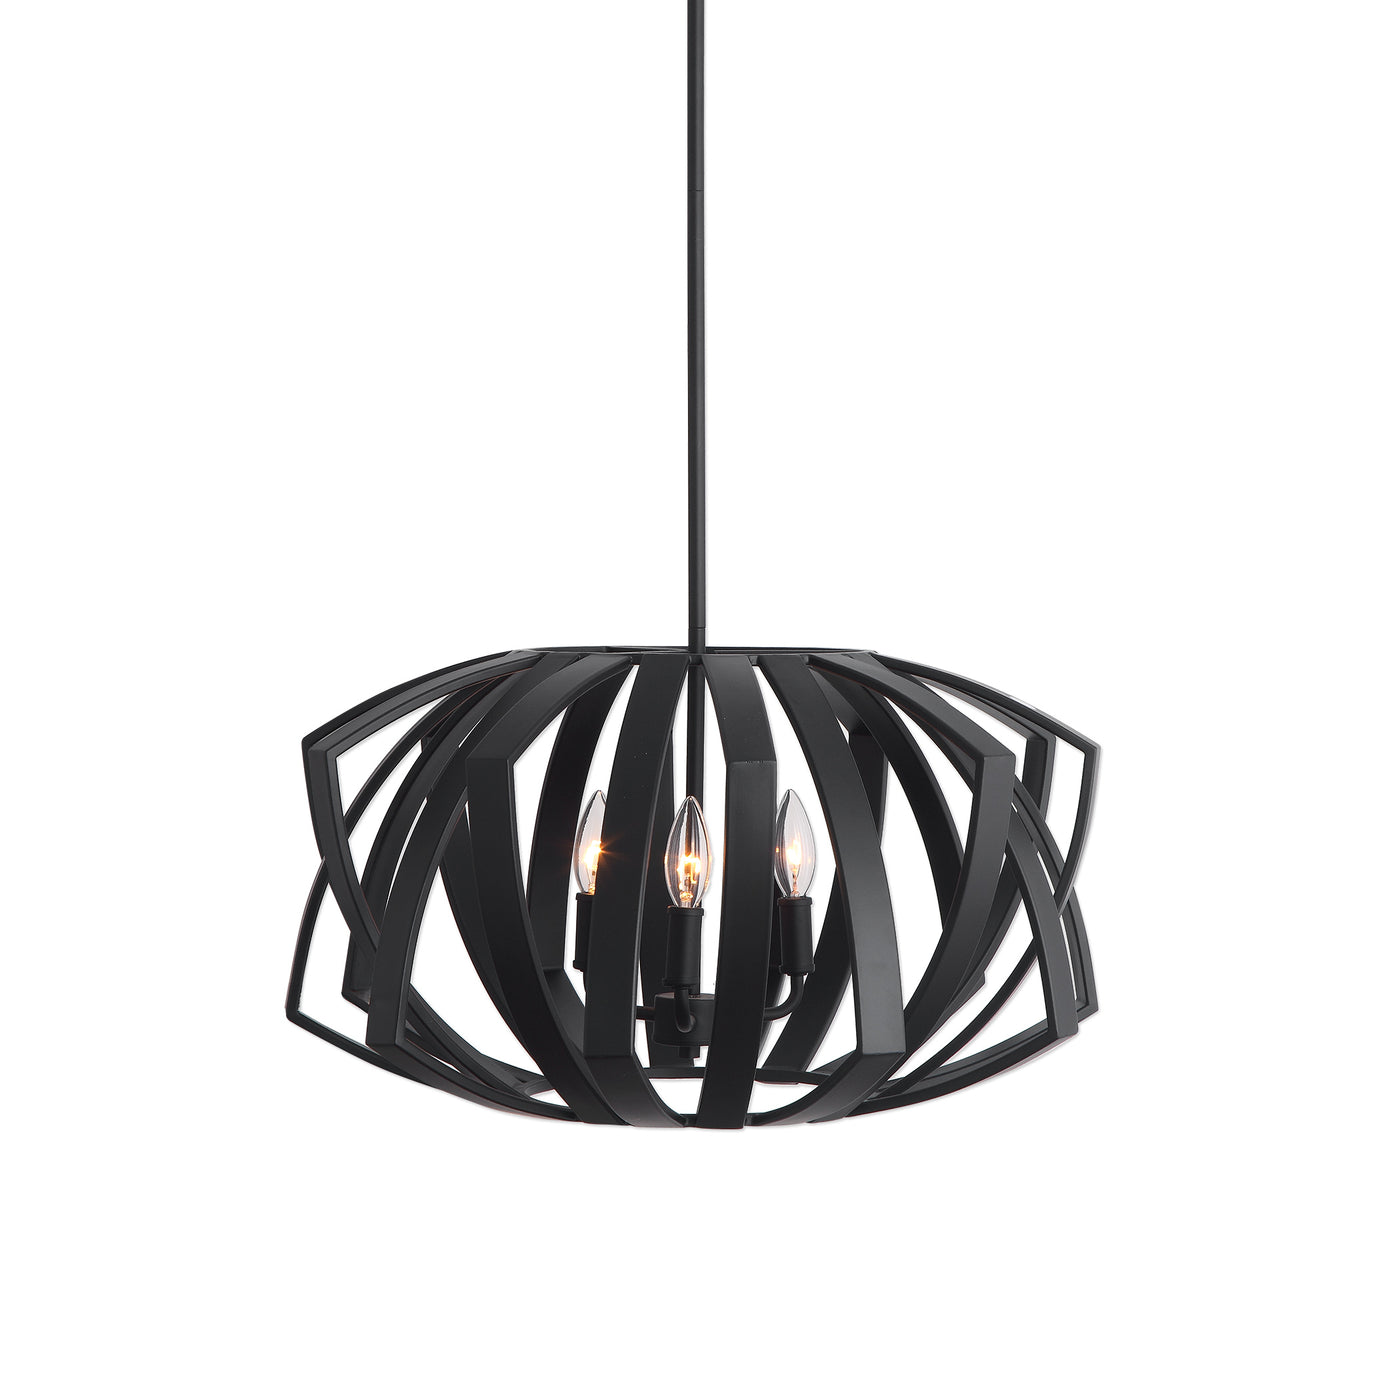 Matte Black Geometric Pendant Harkens From Mid-century Design Roots. Includes 15' Wire, 3-12" Stems And 1-6" Stem For Adju...